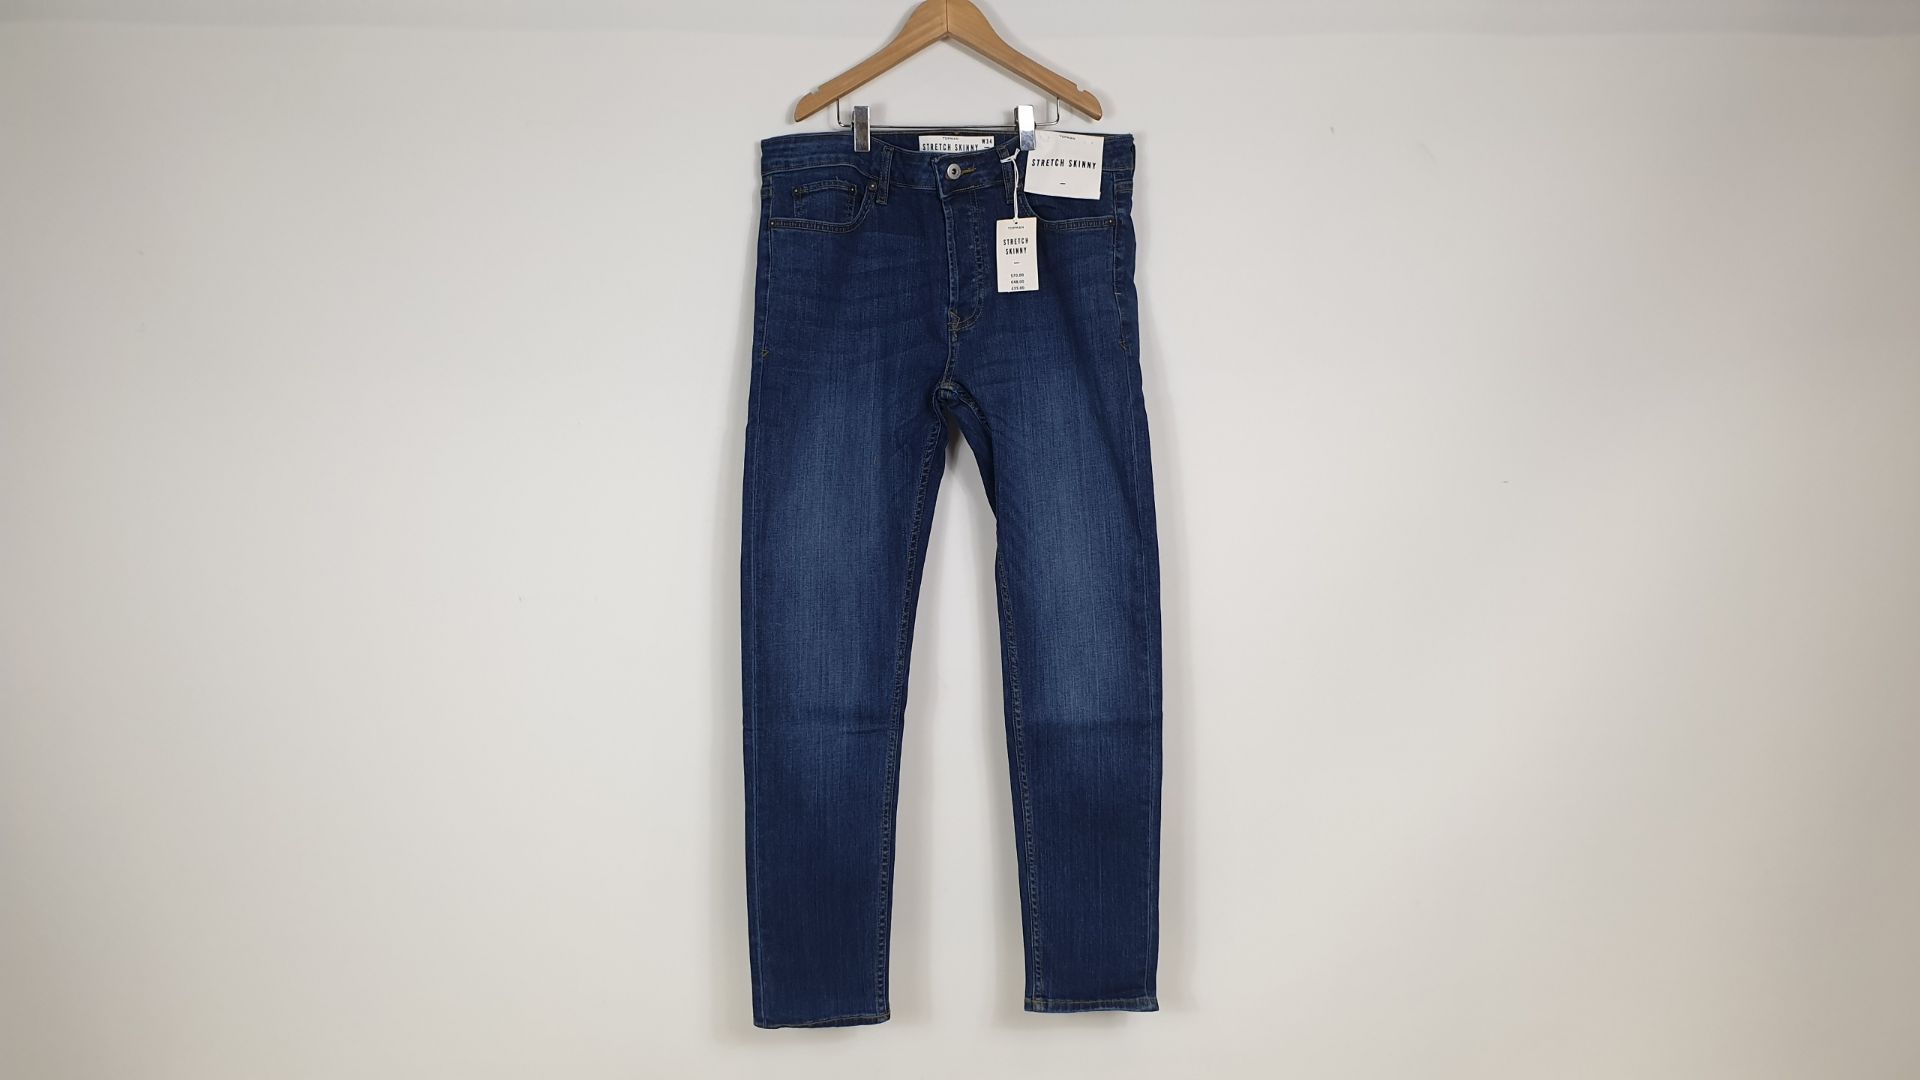 20 X BRAND NEW TOPMAN STRETCH SKINNY BLUE JEANS (RN 125149) - IN VARIOUS SIZES RRP - £30.00pp